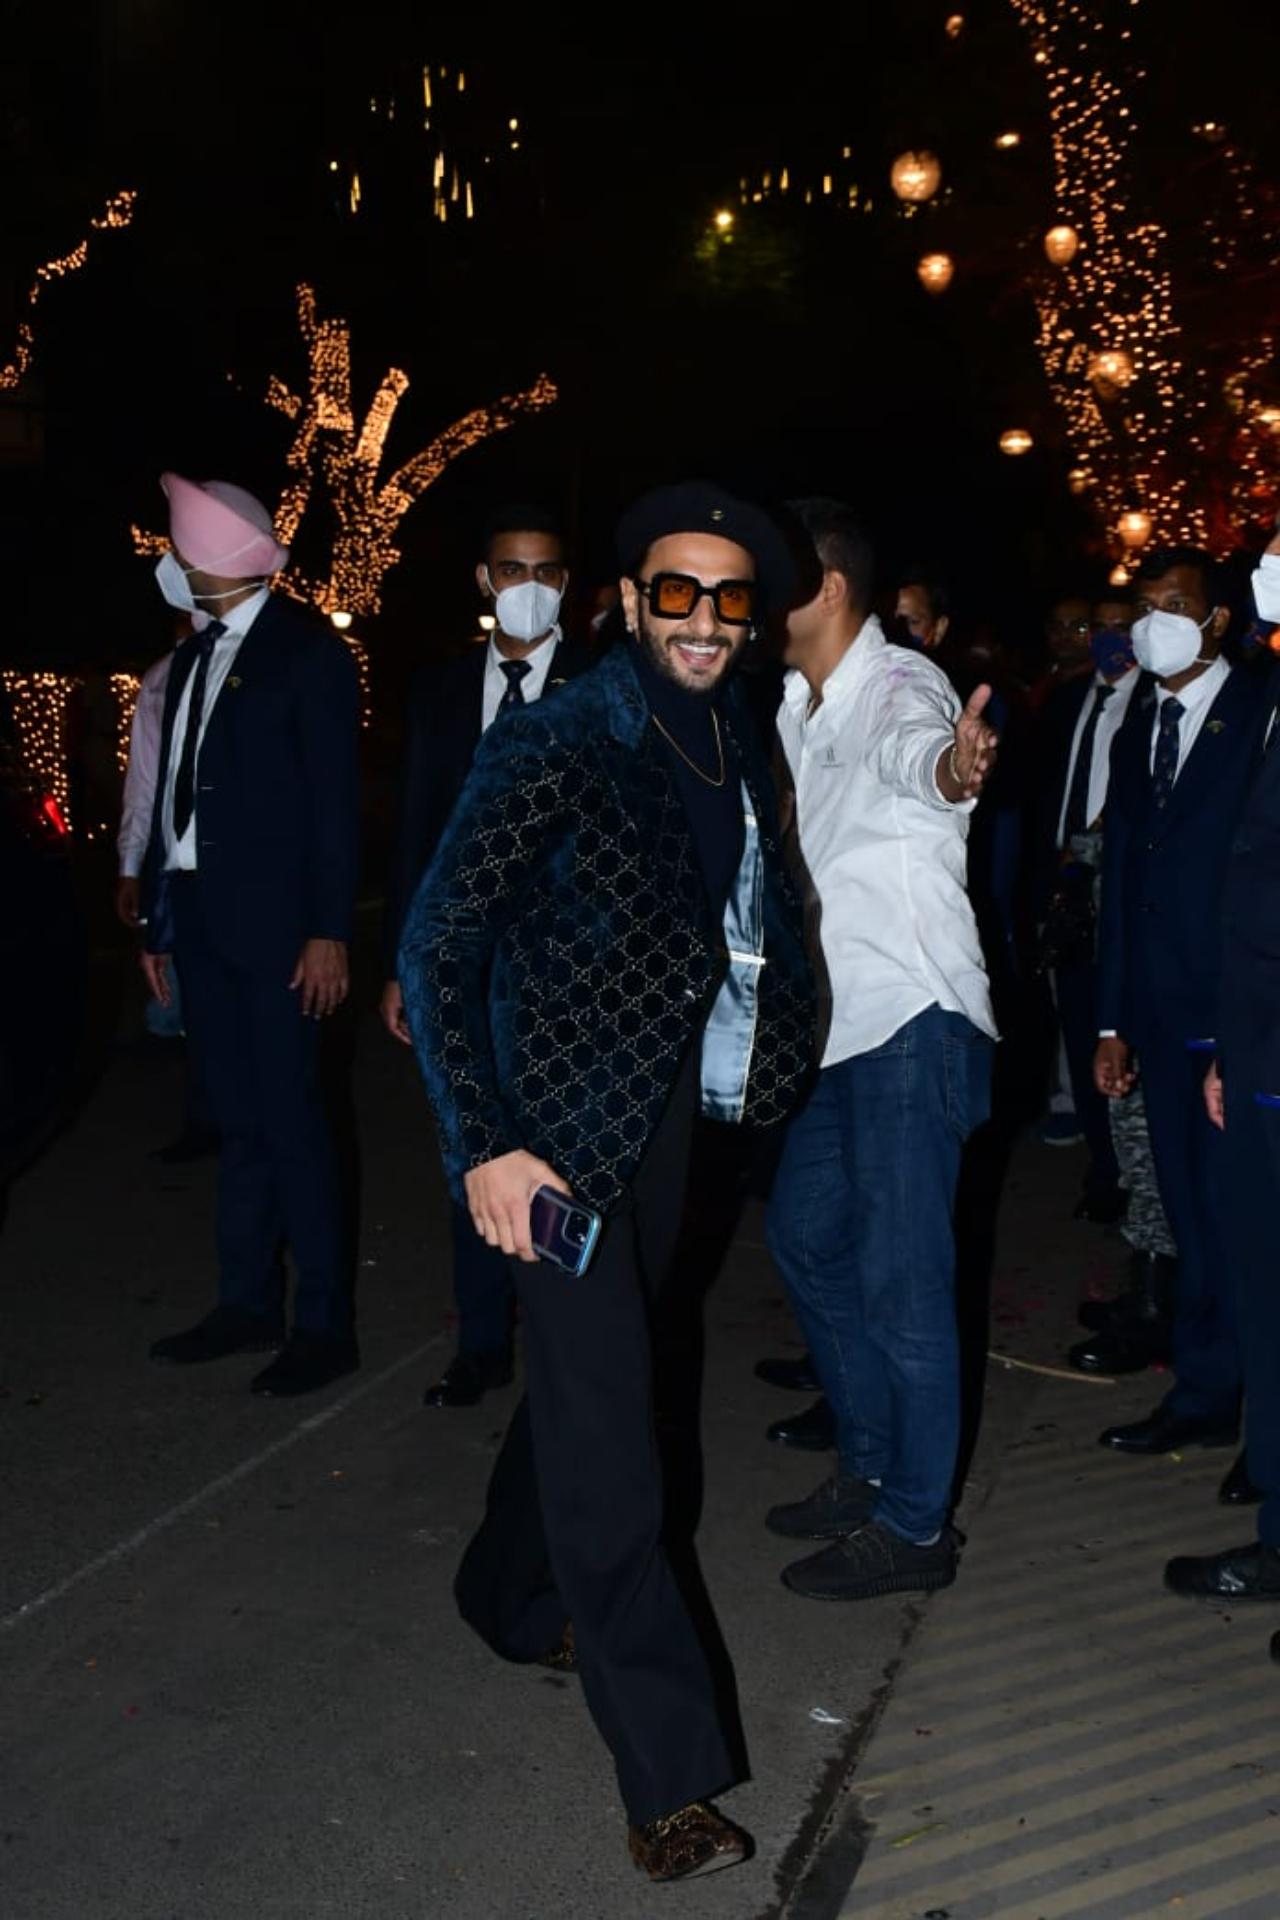 Ranveer Singh was his jolly self as he arrived for the party.  He opted for a super chic look wrapped in a blue velvet suit, as he happily waved to the photographers stationed at the event